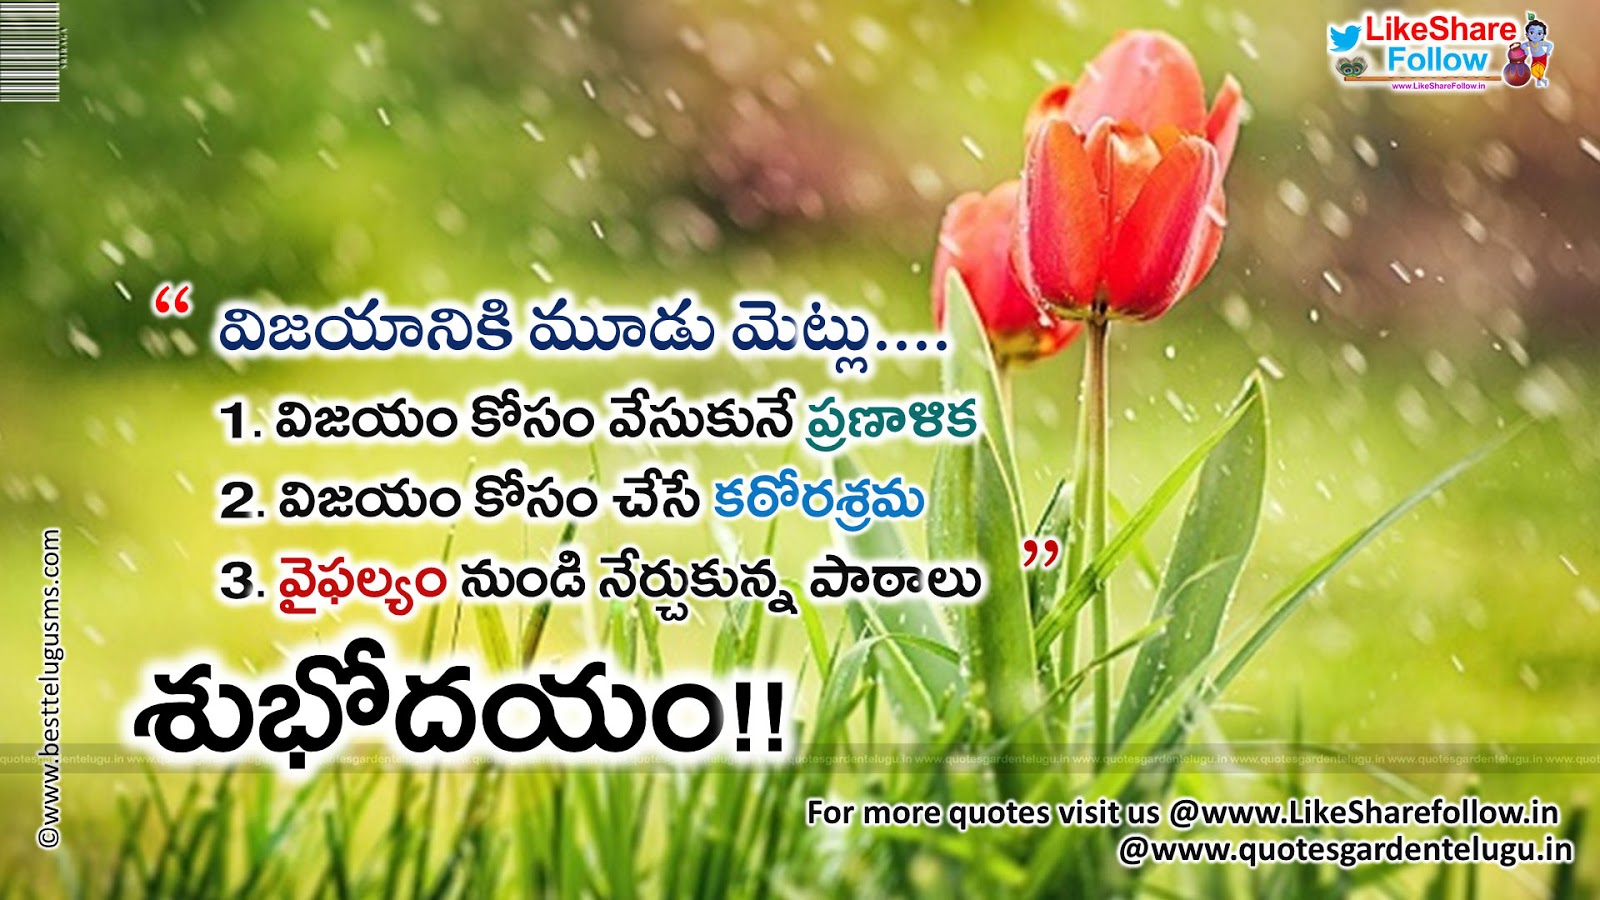 Best good morning quotes in telugu messages wallpapers | Like ...